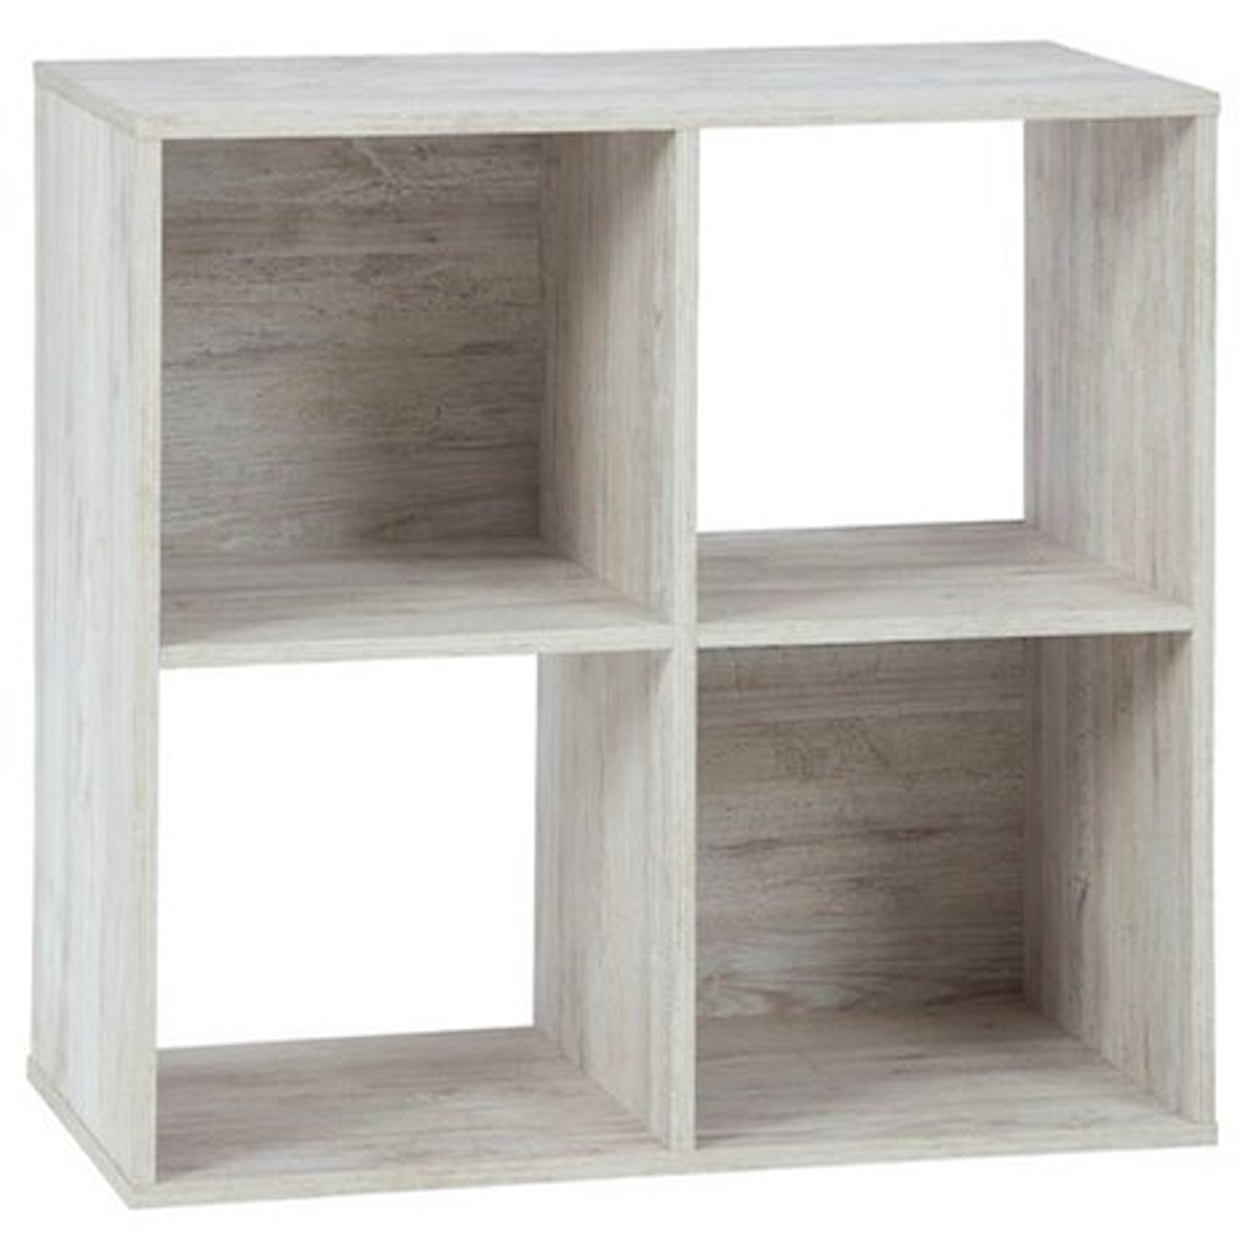 Signature Design by Ashley Paxberry Four Cube Organizer